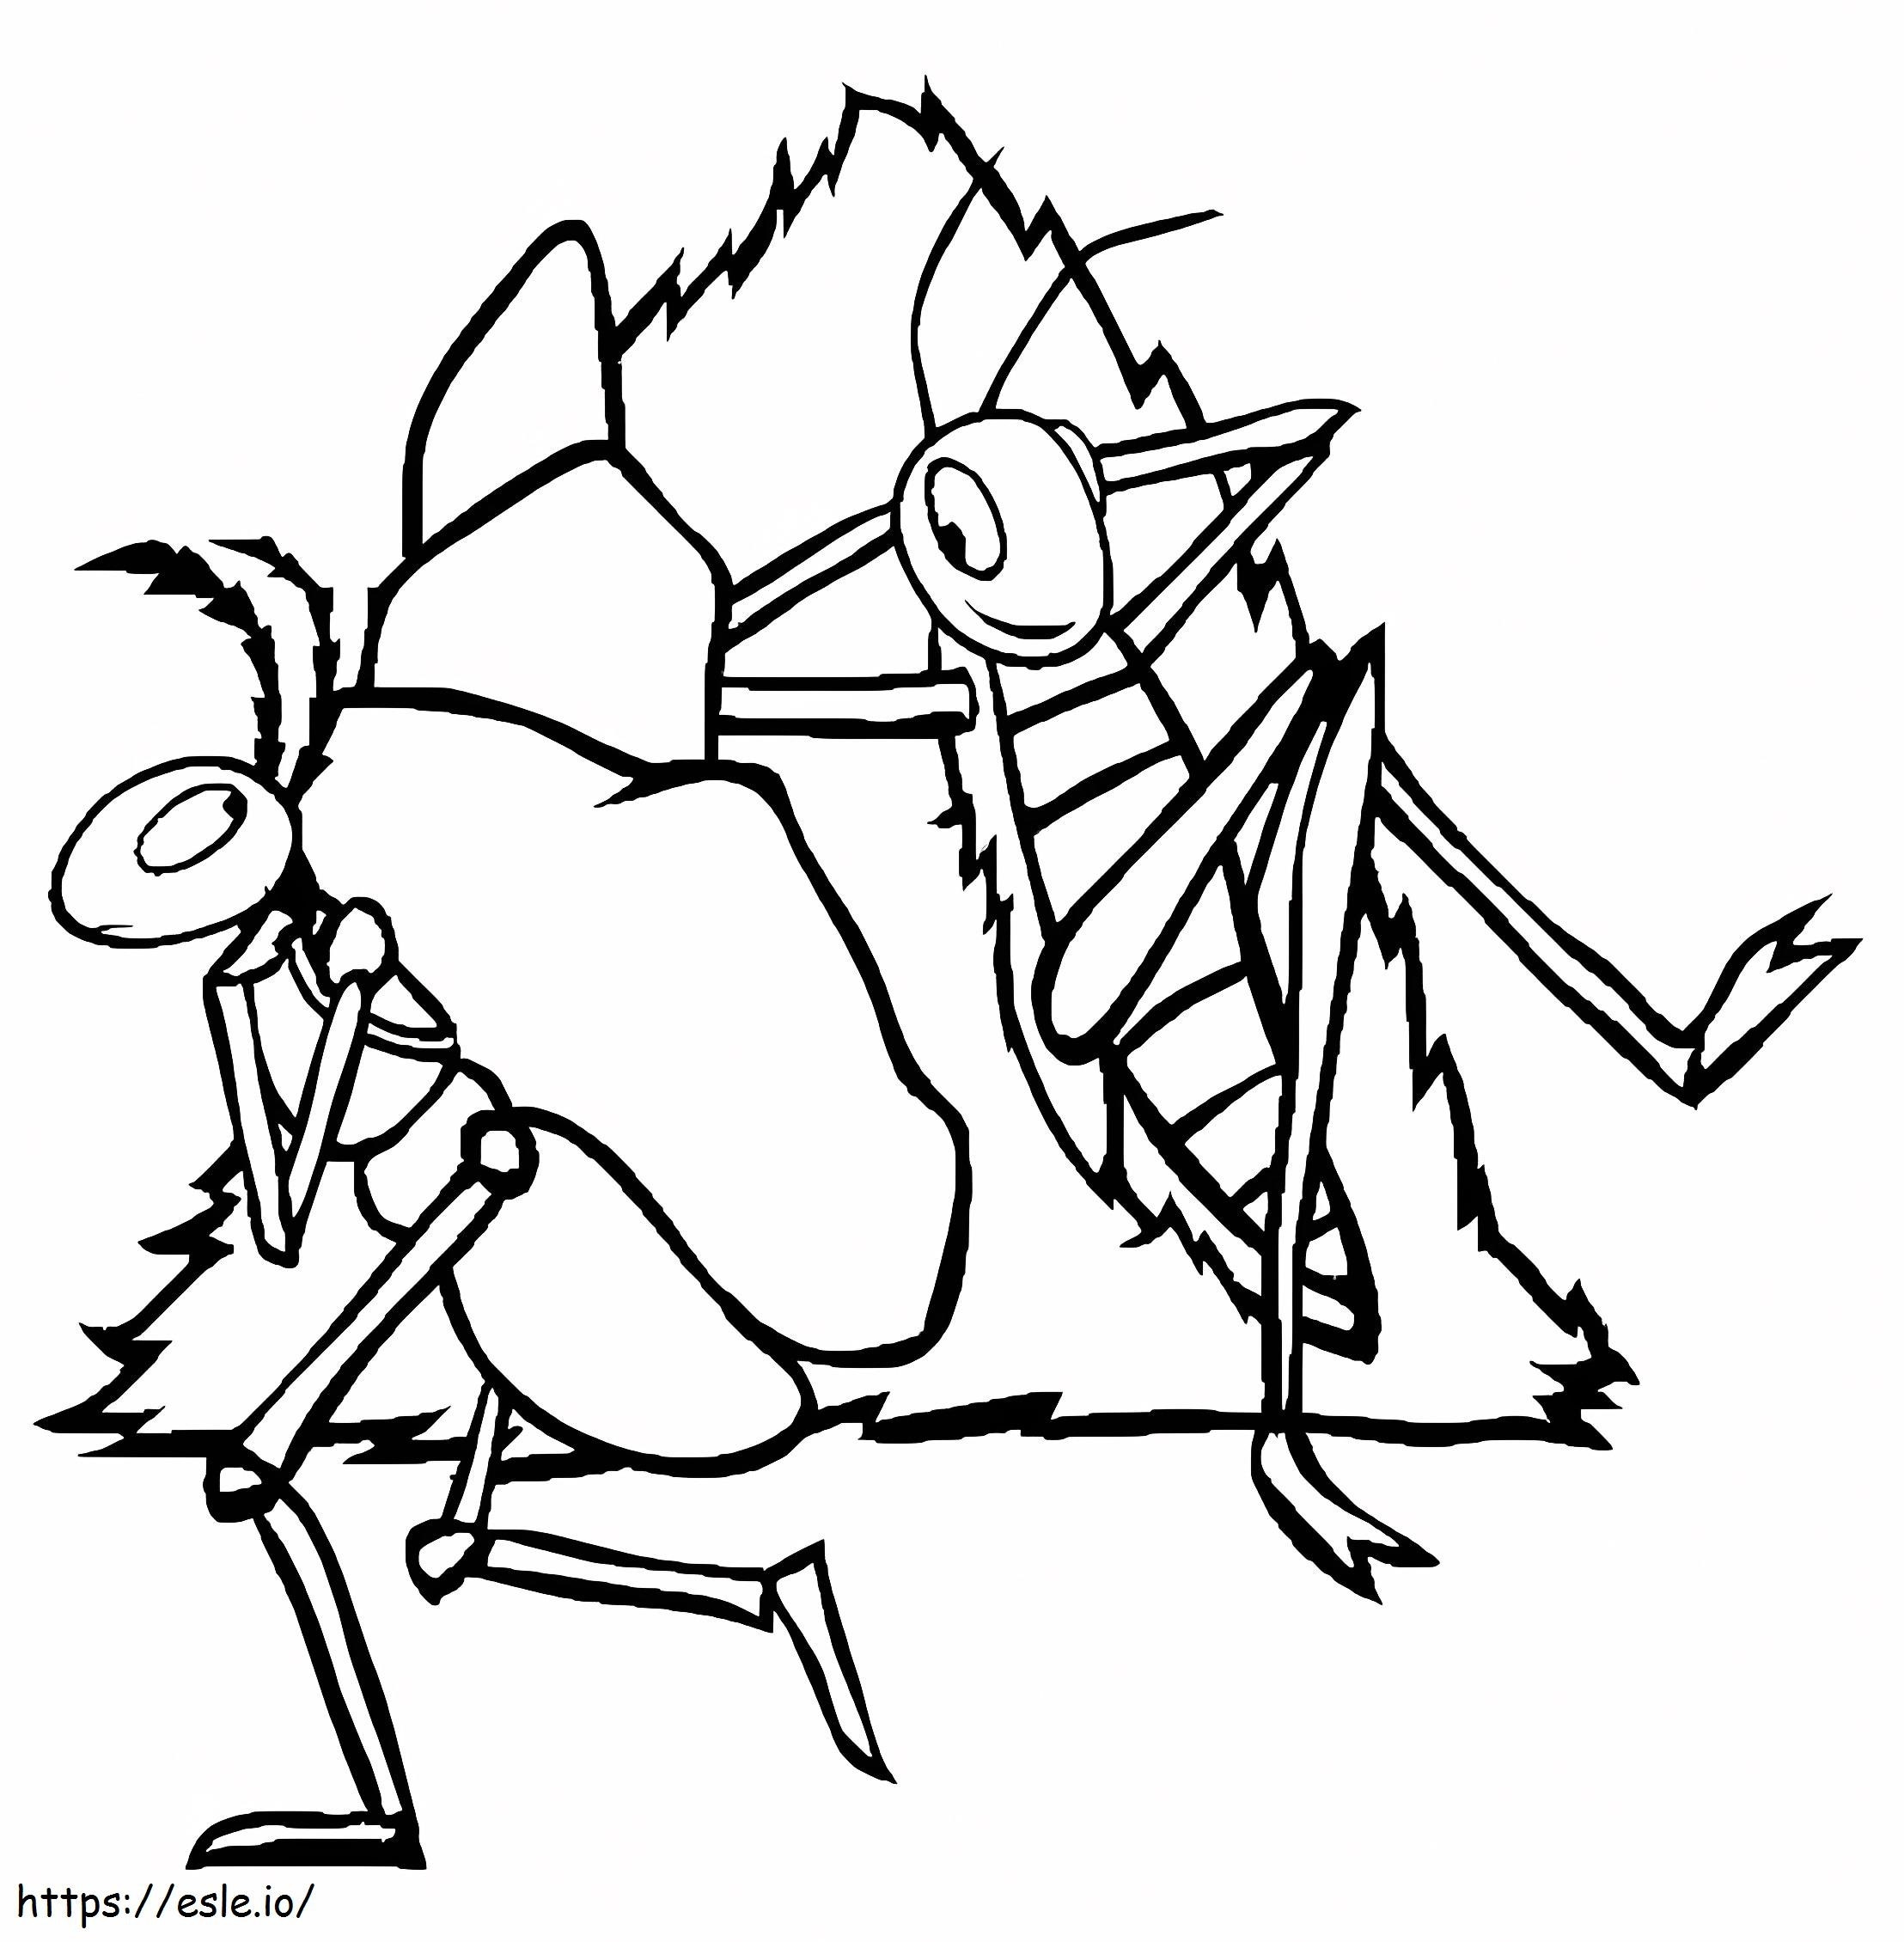 Ant And Grasshopper coloring page